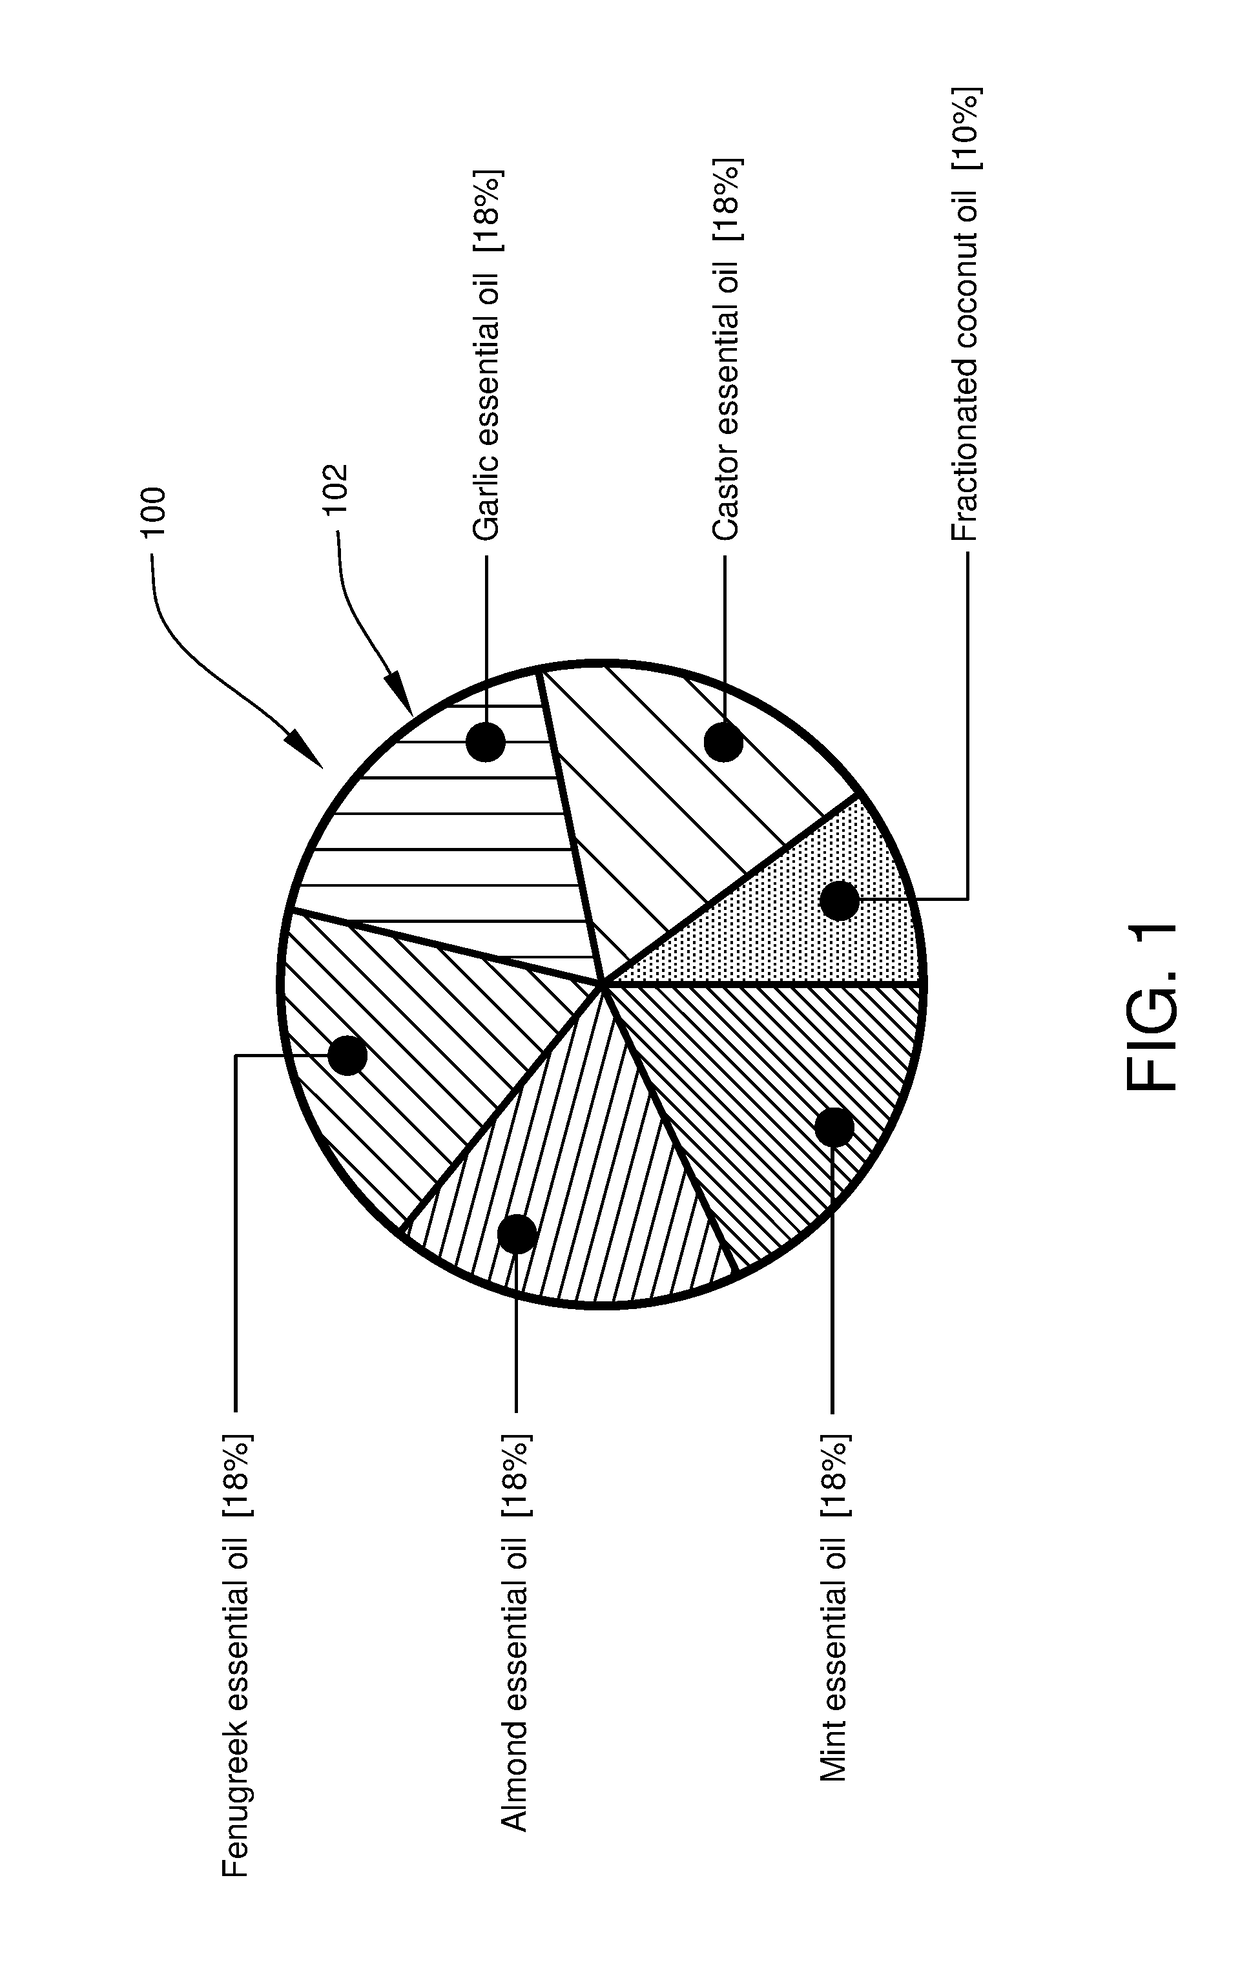 Therapeutic compositions and uses thereof for alleviating pain systems